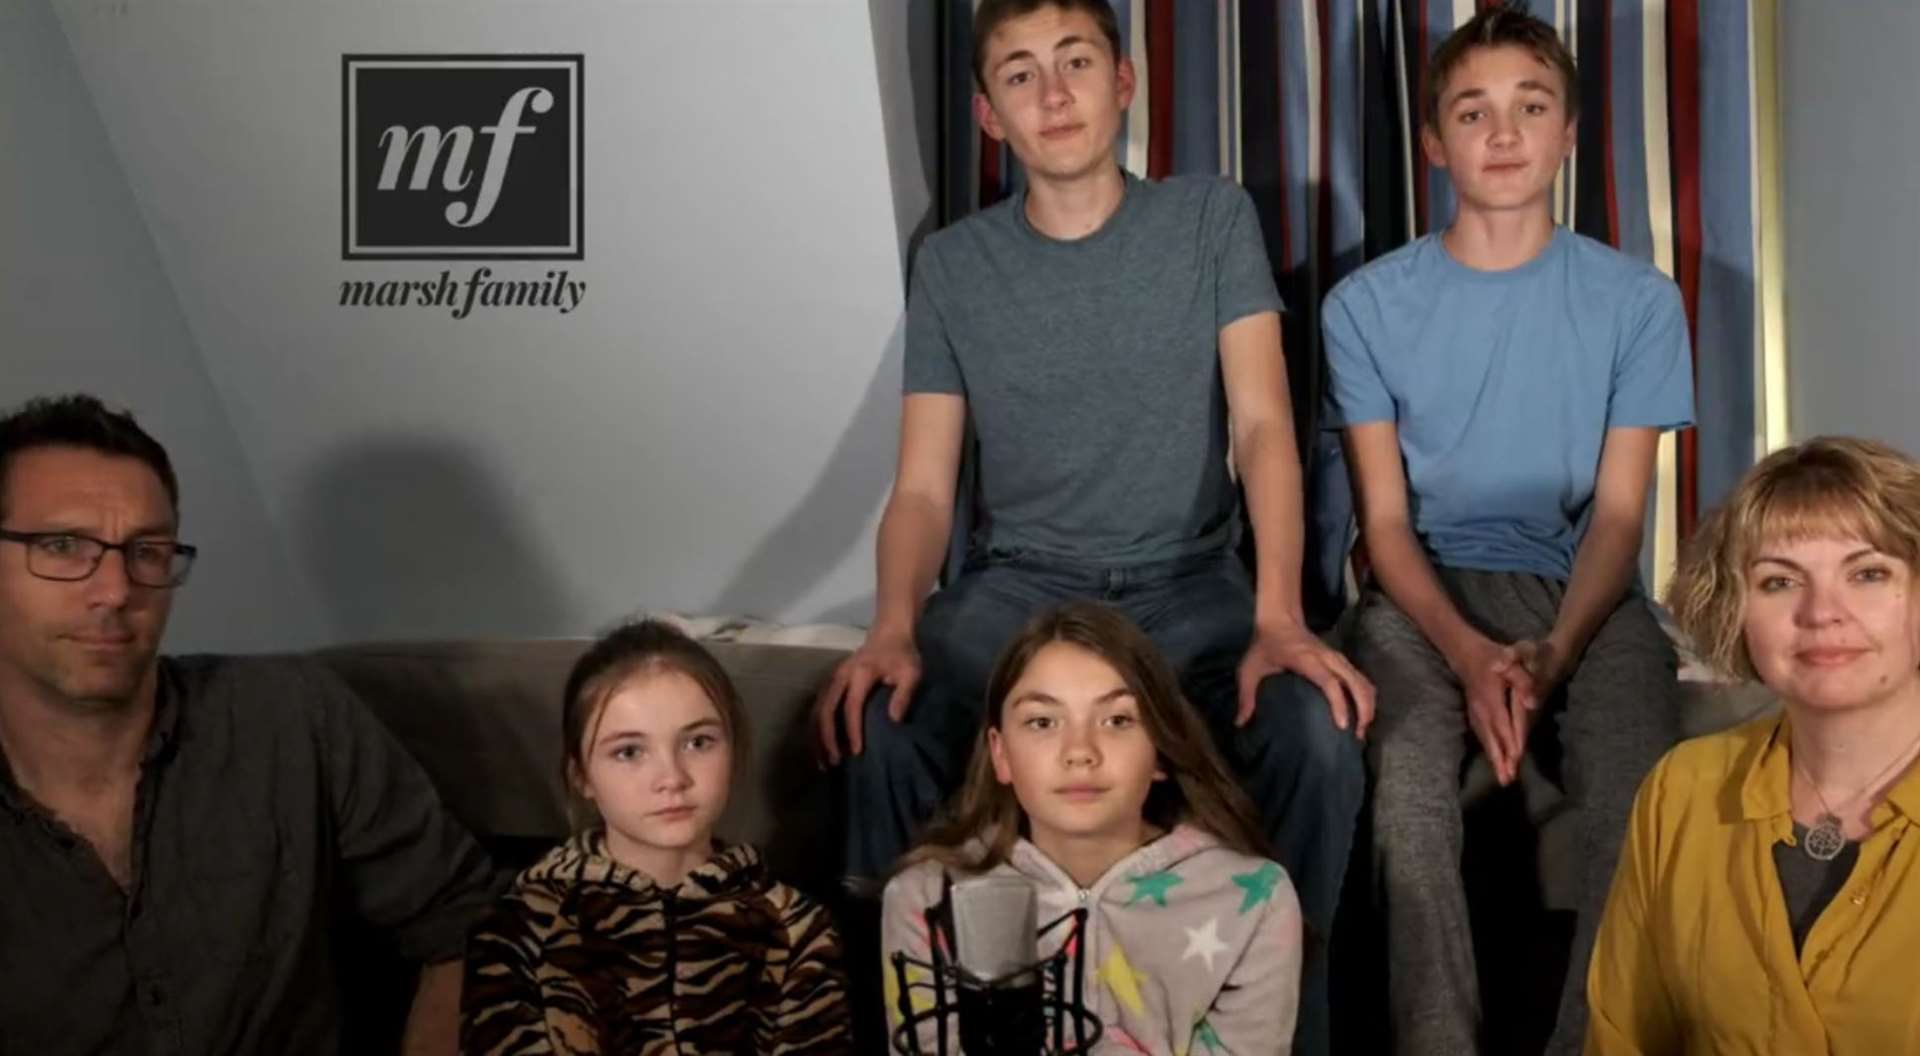 The Marsh Family, from Faversham, have been going viral for their singing videos. Picture: The Marsh Family